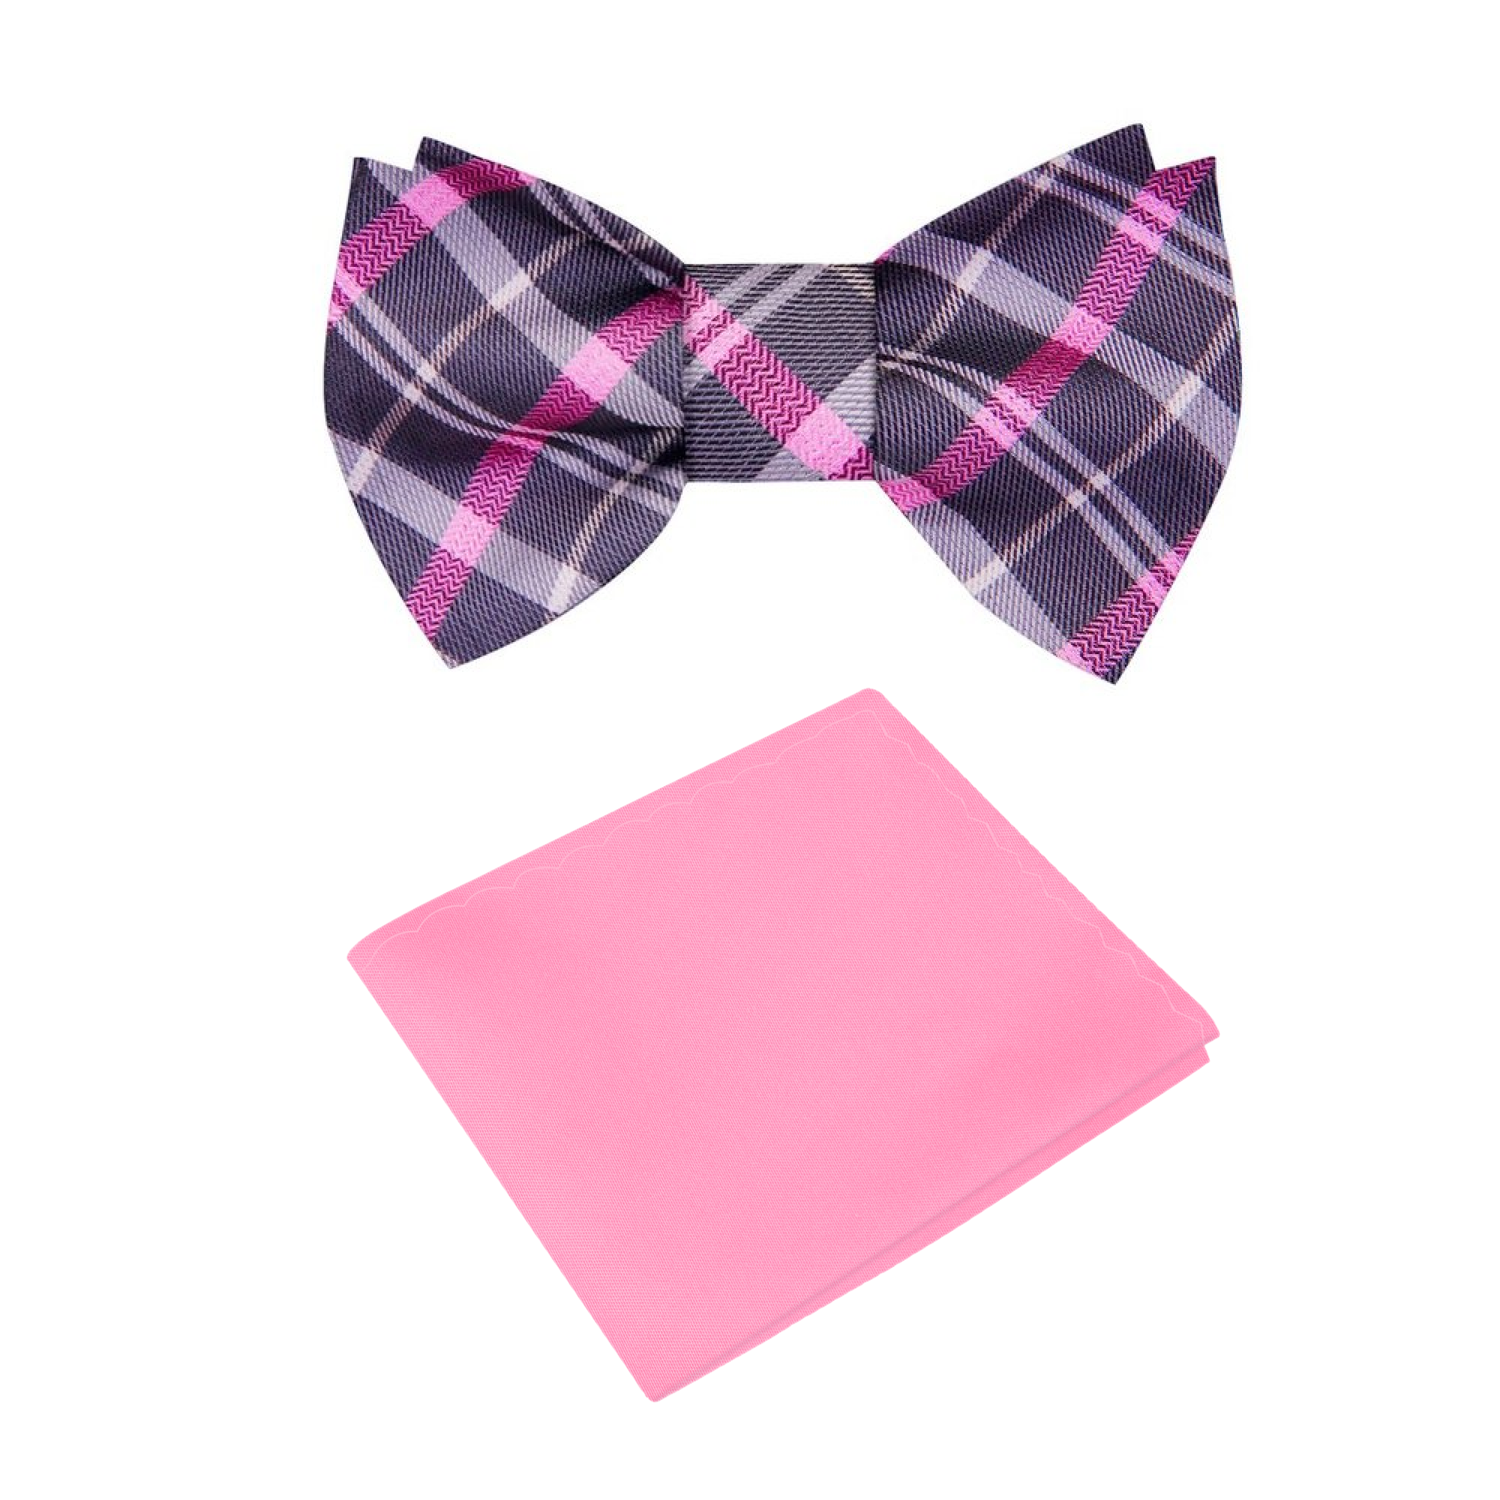 Refined Plaid Bow Tie